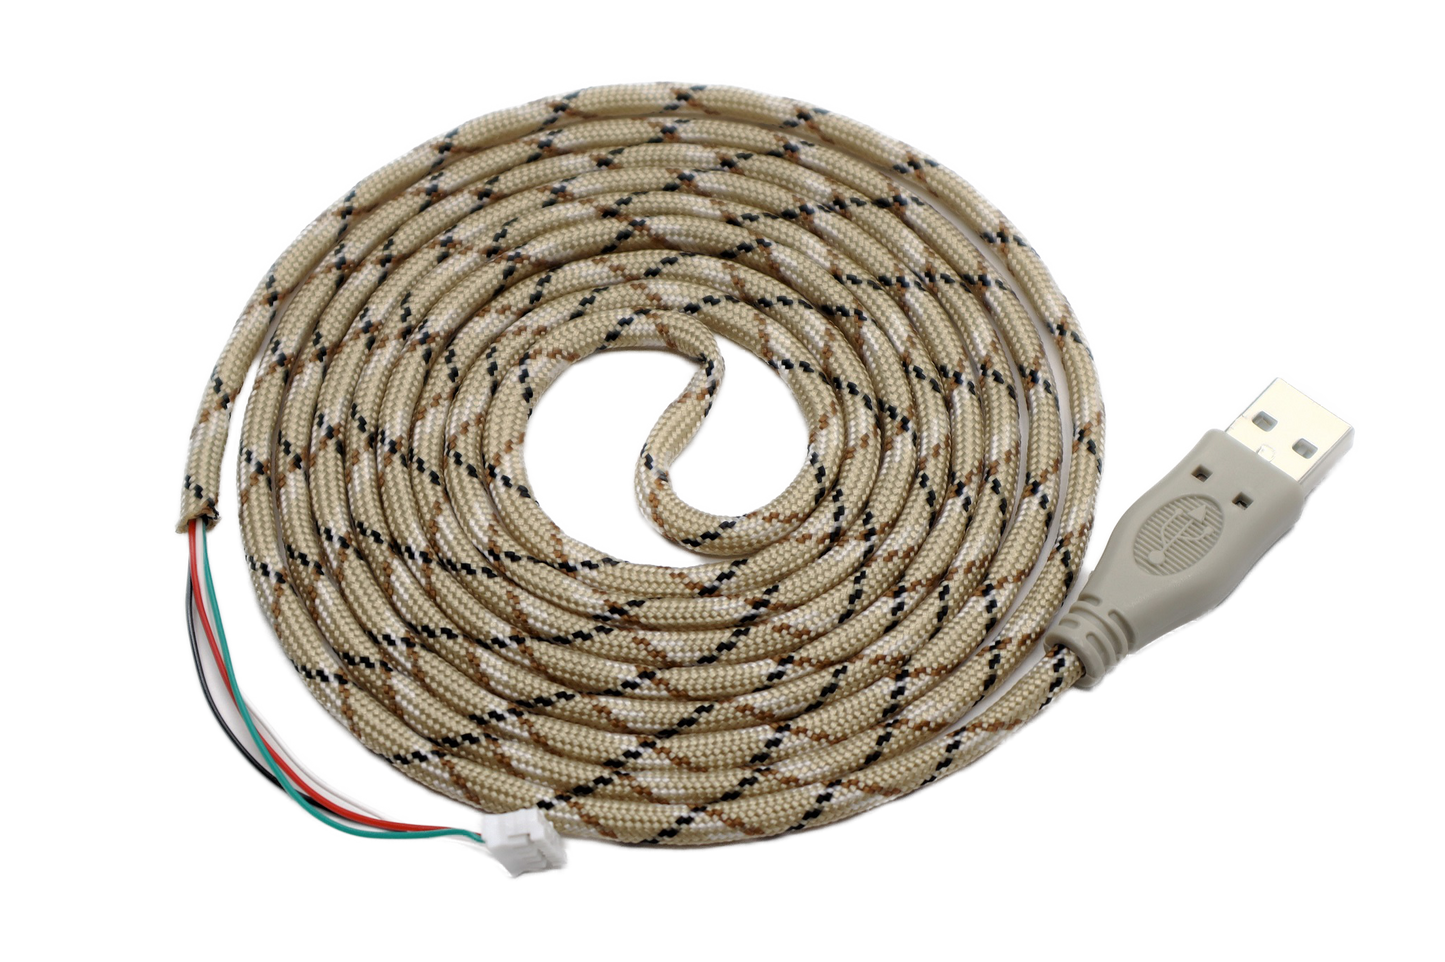 Desert Camo Paracord Mouse Cable Gray USB